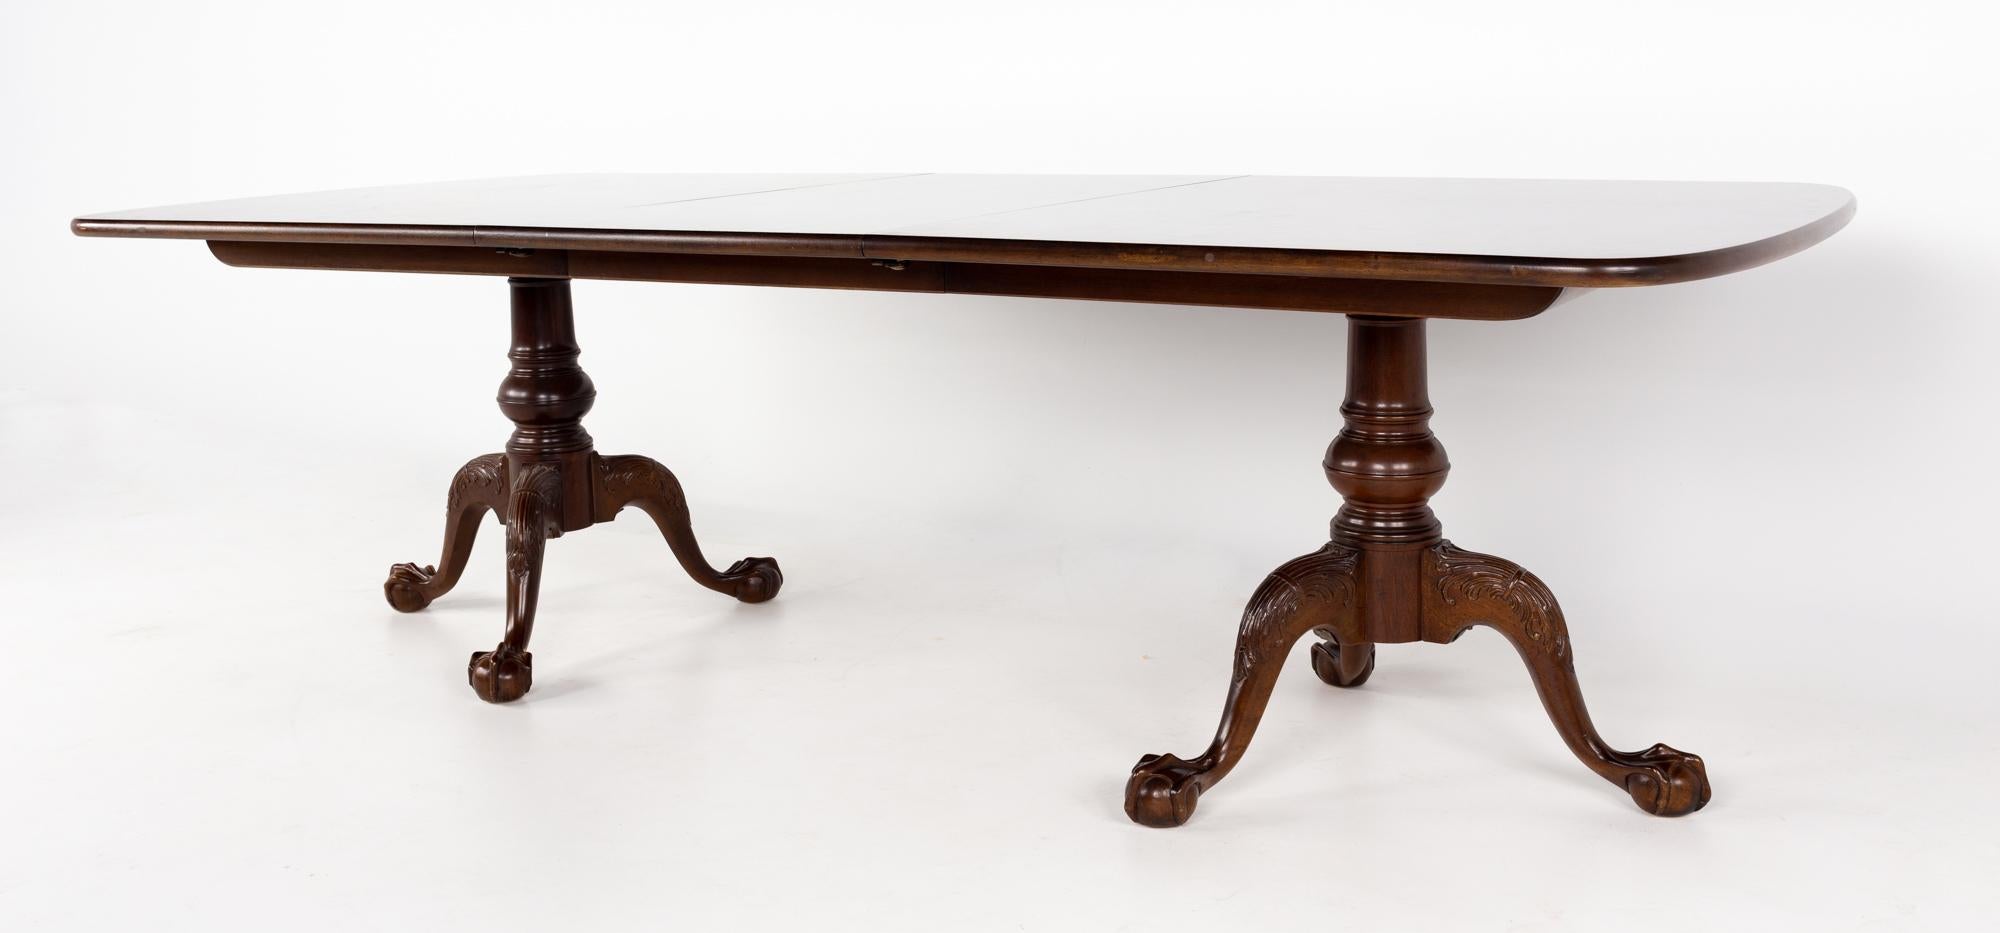 Henredon Aston Court Mahogany Dining Table with 2 Leaves 4